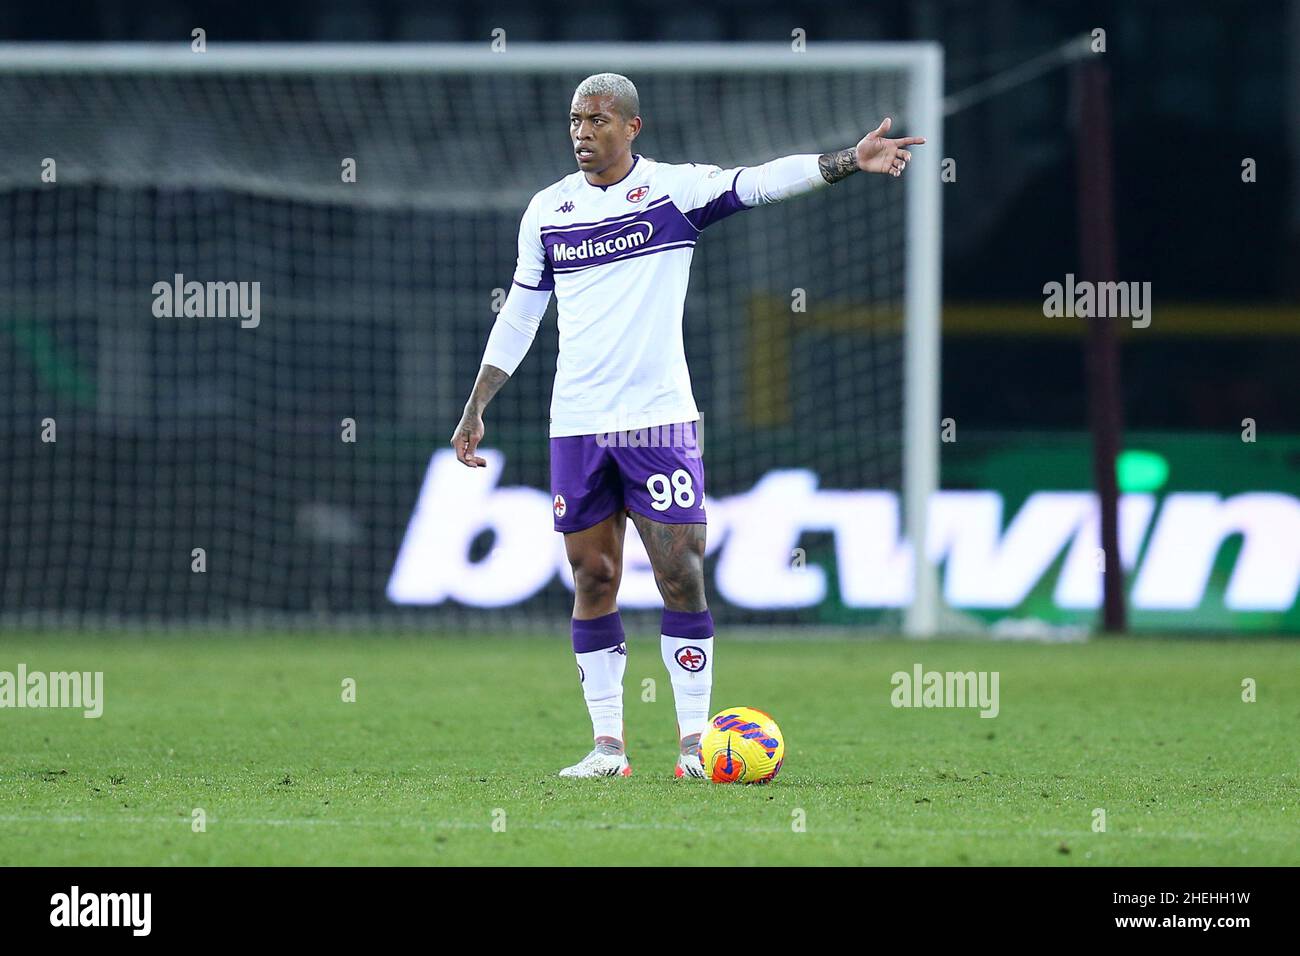 Igor Julio of Acf Fiorentina controls the ball during the Serie A match  between Juventus Fc and Acf Fiorentina Stock Photo - Alamy